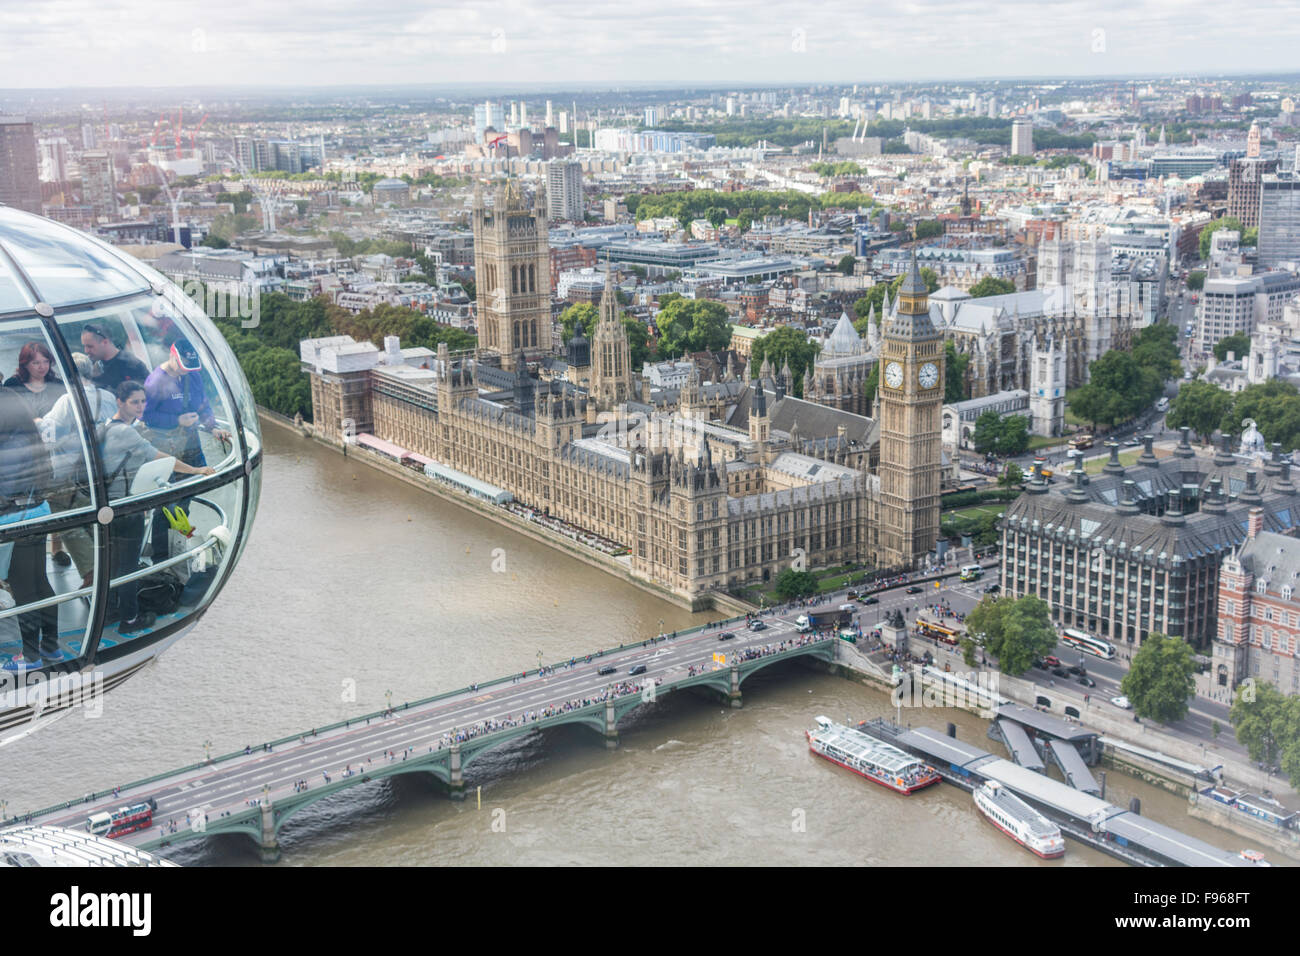 A view of Big Ben and House of Parliament in London, England, taken from a capsule of the London Eye panoramic wheel Stock Photo